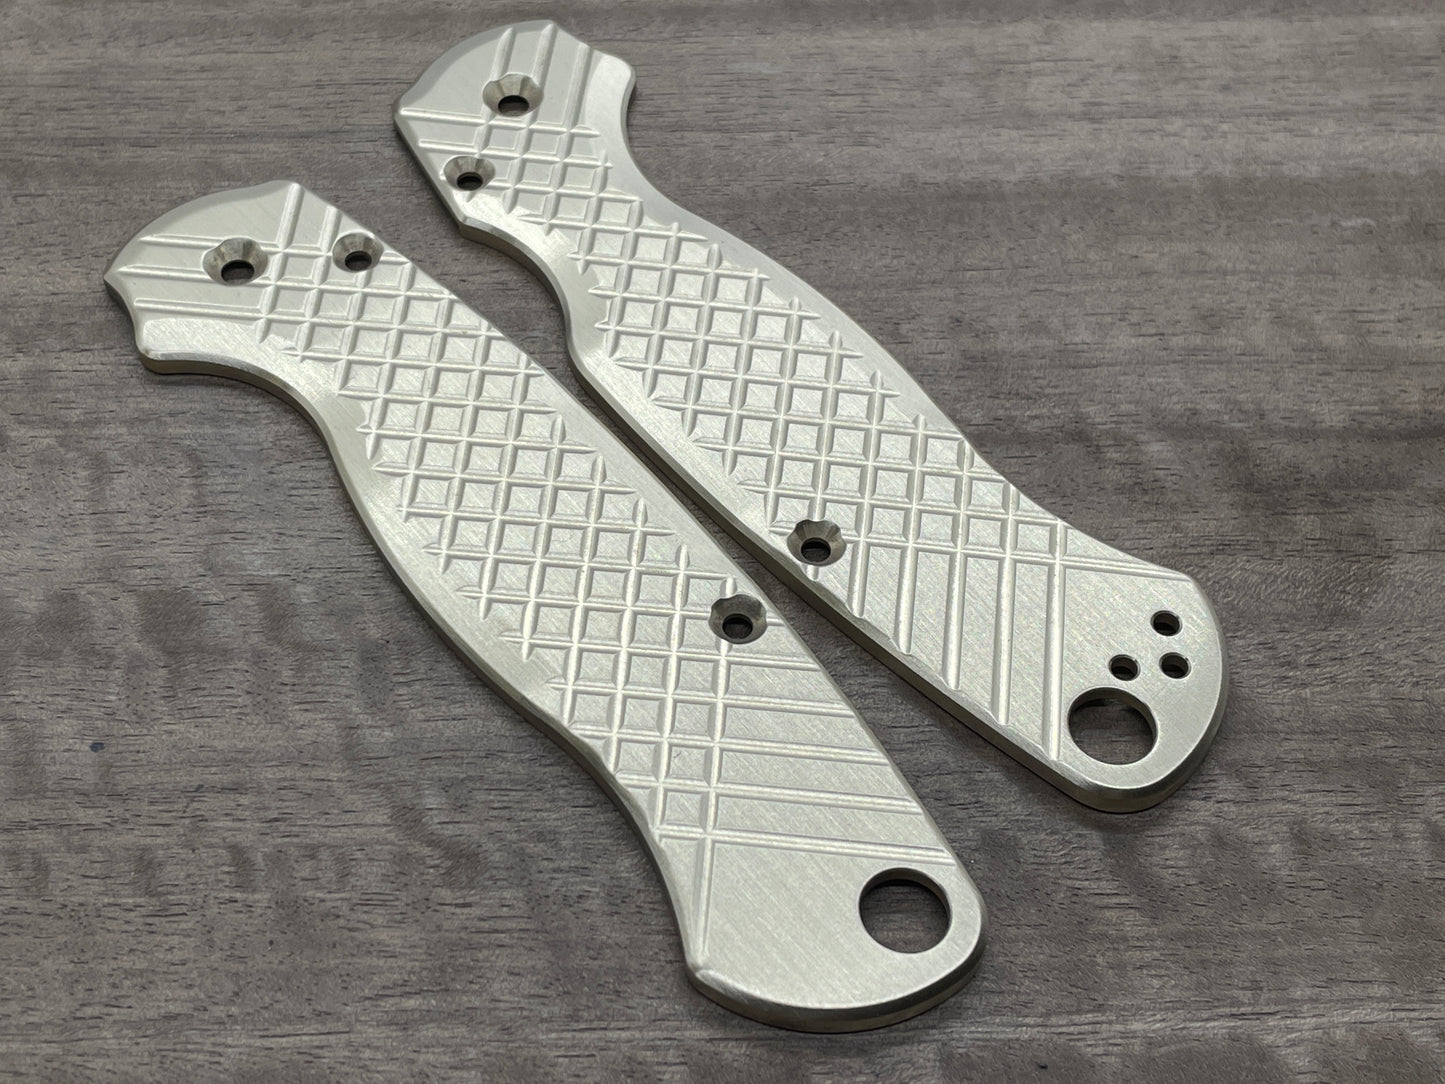 FRAG milled Brushed Brass Scales for Spyderco Paramilitary 2 PM2